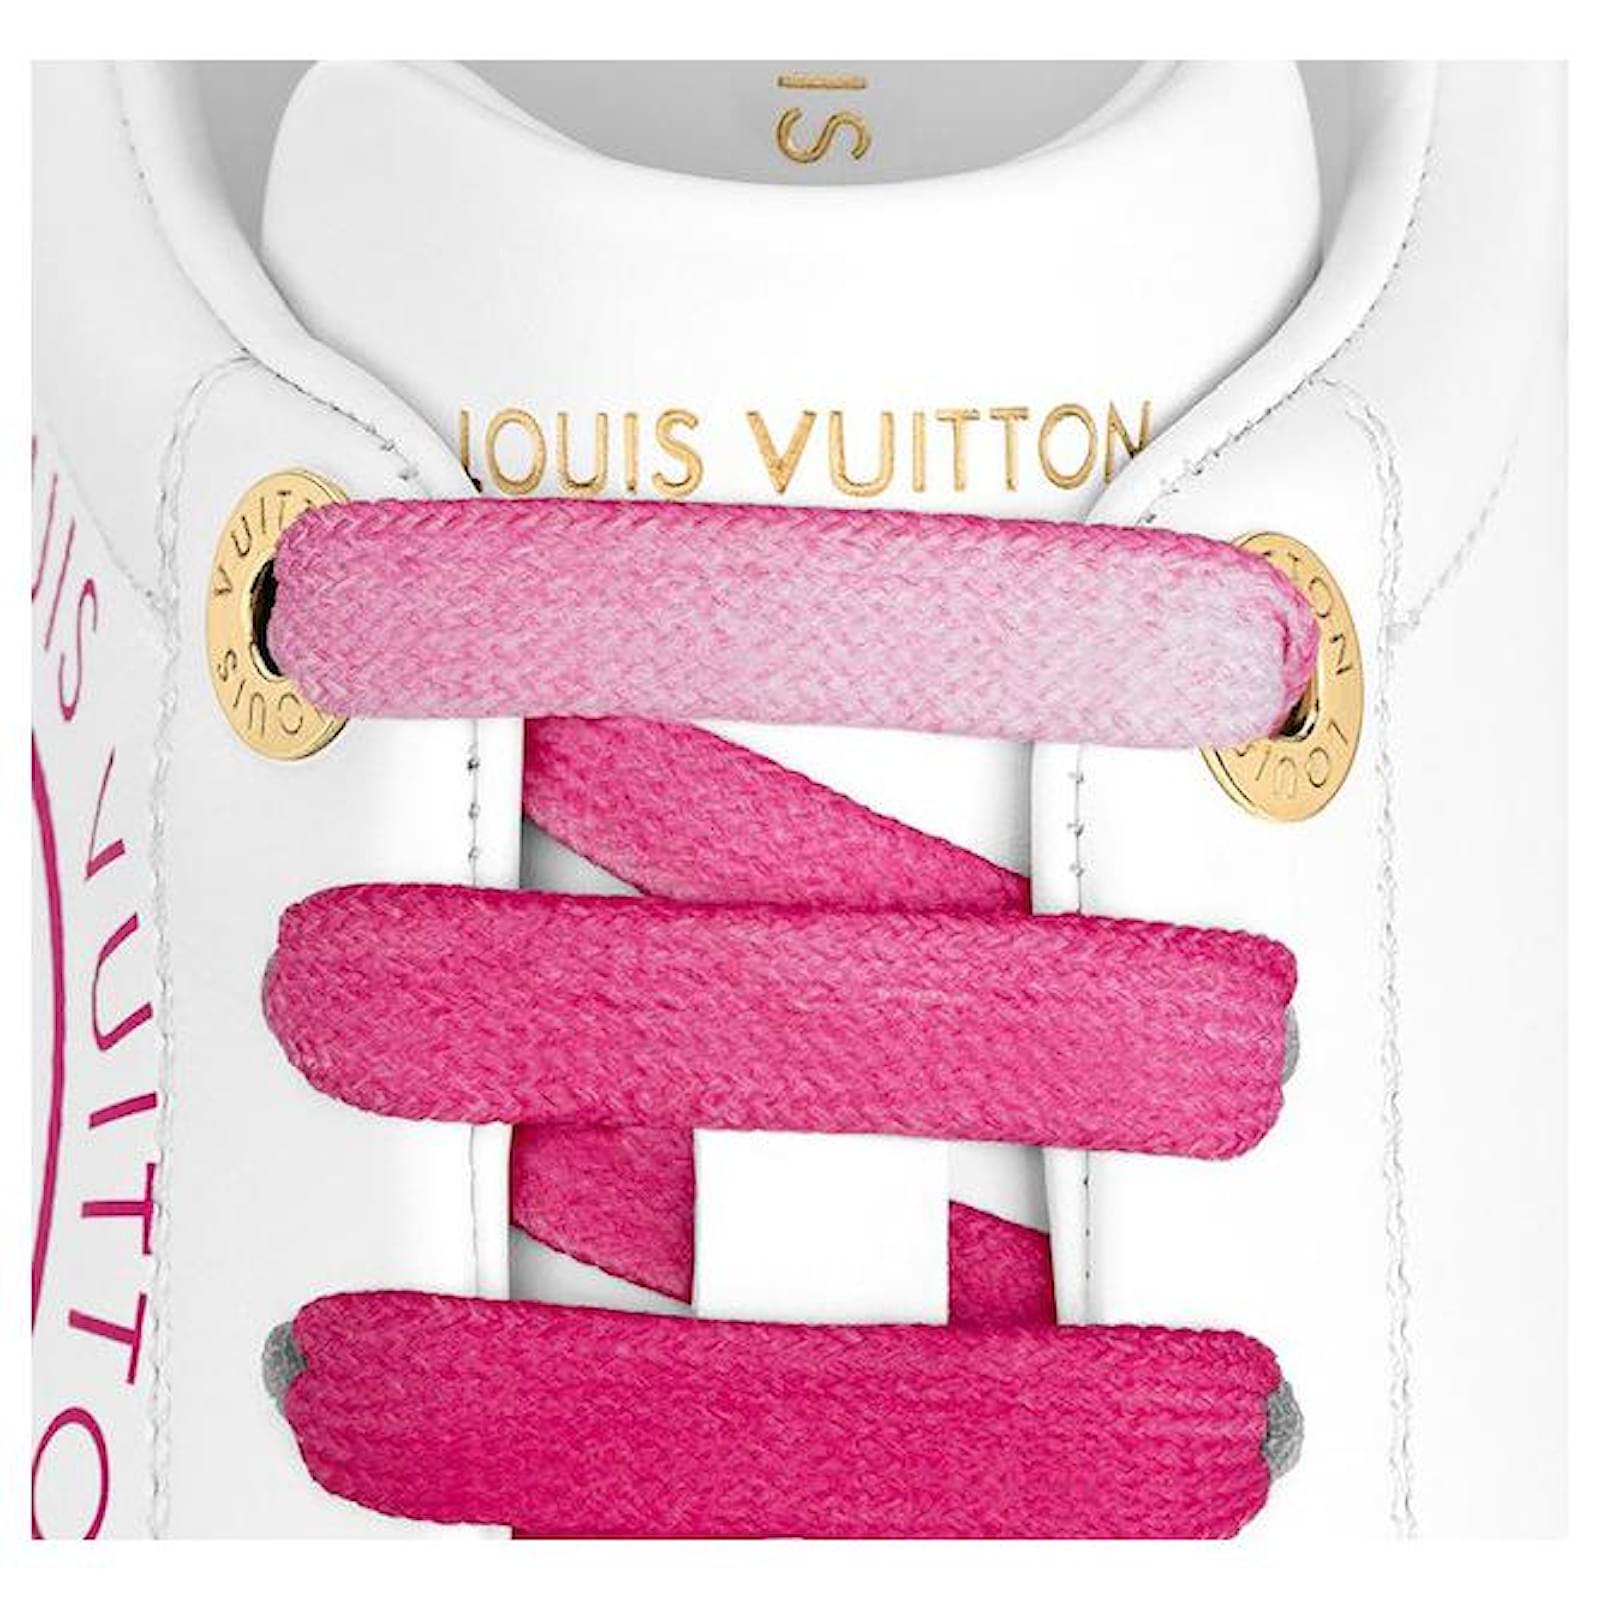 Louis Vuitton, Shoes, Louis Vuitton Nwt Time Out Sneaker 365 Fuchsia One  Shoe Tried On